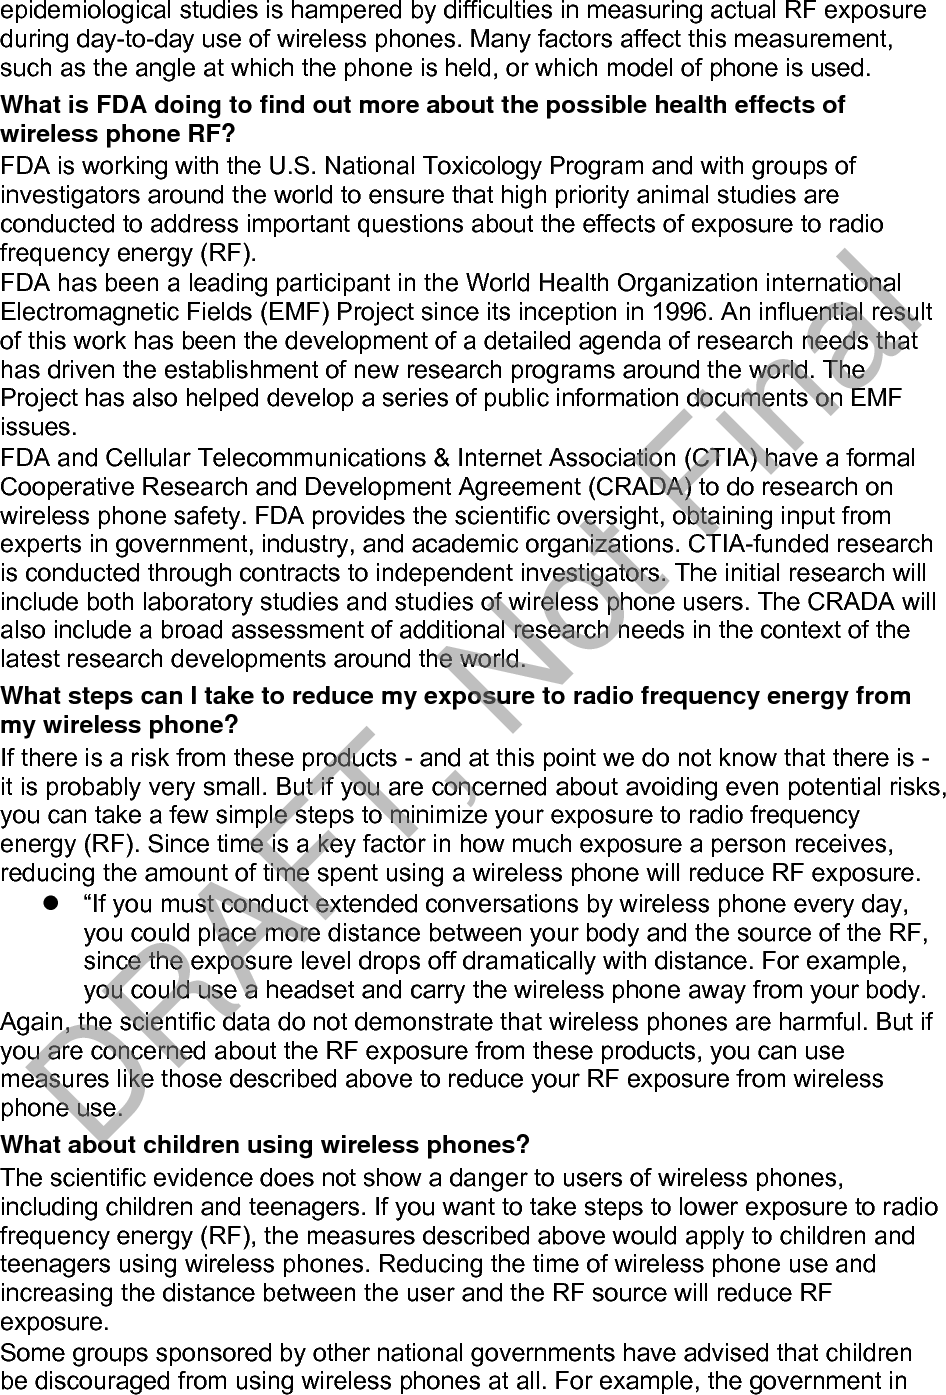 the United Kingdom distributed leaflets containing such a recommendation in December 2000. They noted that no evidence exists that using a wireless phone causes brain tumors or other ill effects. Their recommendation to limit wireless phone use by children was strictly precautionary; it was not based on scientific evidence that any health hazard exists.   Do hands-free kits for wireless phones reduce risks from exposure to RF emissions? Since there are no known risks from exposure to RF emissions from wireless phones, there is no reason to believe that hands-free kits reduce risks. Hands-free kits can be used with wireless phones for convenience and comfort. These systems reduce the absorption of RF energy in the head because the phone, which is the source of the RF emissions, will not be placed against the head. On the other hand, if the phone is mounted against the waist or other part of the body during use, then that part of the body will absorb more RF energy. Wireless phones marketed in the U.S. are required to meet safety requirements regardless of whether they are used against the head or against the body. Either configuration should result in compliance with the safety limit. Do wireless phone accessories that claim to shield the head from RF radiation work? Since there are no known risks from exposure to RF emissions from wireless phones, there is no reason to believe that accessories that claim to shield the head from those emissions reduce risks. Some products that claim to shield the user from RF absorption use special phone cases, while others involve nothing more than a metallic accessory attached to the phone. Studies have shown that these products generally do not work as advertised. Unlike “hand-free” kits, these so-called “shields” may interfere with proper operation of the phone. The phone may be forced to boost its power to compensate, leading to an increase in RF absorption. In February 2002, the Federal trade Commission (FTC) charged two companies that sold devices that claimed to protect wireless phone users from radiation with making false and unsubstantiated claims. According to FTC, these defendants lacked a reasonable basis to substantiate their claim. What about wireless phone interference with medical equipment? Radio frequency energy (RF) from wireless phones can interact with some electronic devices. For this reason, FDA helped develop a detailed test method to measure electromagnetic interference (EMI) of implanted cardiac pacemakers and defibrillators from wireless telephones. This test method is now part of a standard sponsored by the Association for the Advancement of Medical instrumentation (AAMI). The final draft, a joint effort by FDA, medical device manufacturers, and many other groups, was completed in late 2000. This standard will allow manufacturers to ensure that cardiac pacemakers and defibrillators are safe from wireless phone EMI. FDA has tested wireless phones and helped develop a voluntary standard sponsored by the Institute of Electrical and Electronic Engineers (IEEE). This standard specifies test methods and performance requirements for hearing aids and wireless phones so that no interference occurs when a person uses a compatible phone and a compatible hearing aid at the same time. This standard was approved by the IEEE in 2000. FDA continues to monitor the use of wireless phones for possible interactions with other medical devices. Should harmful interference be found to occur, FDA will DRAFT, Not Final